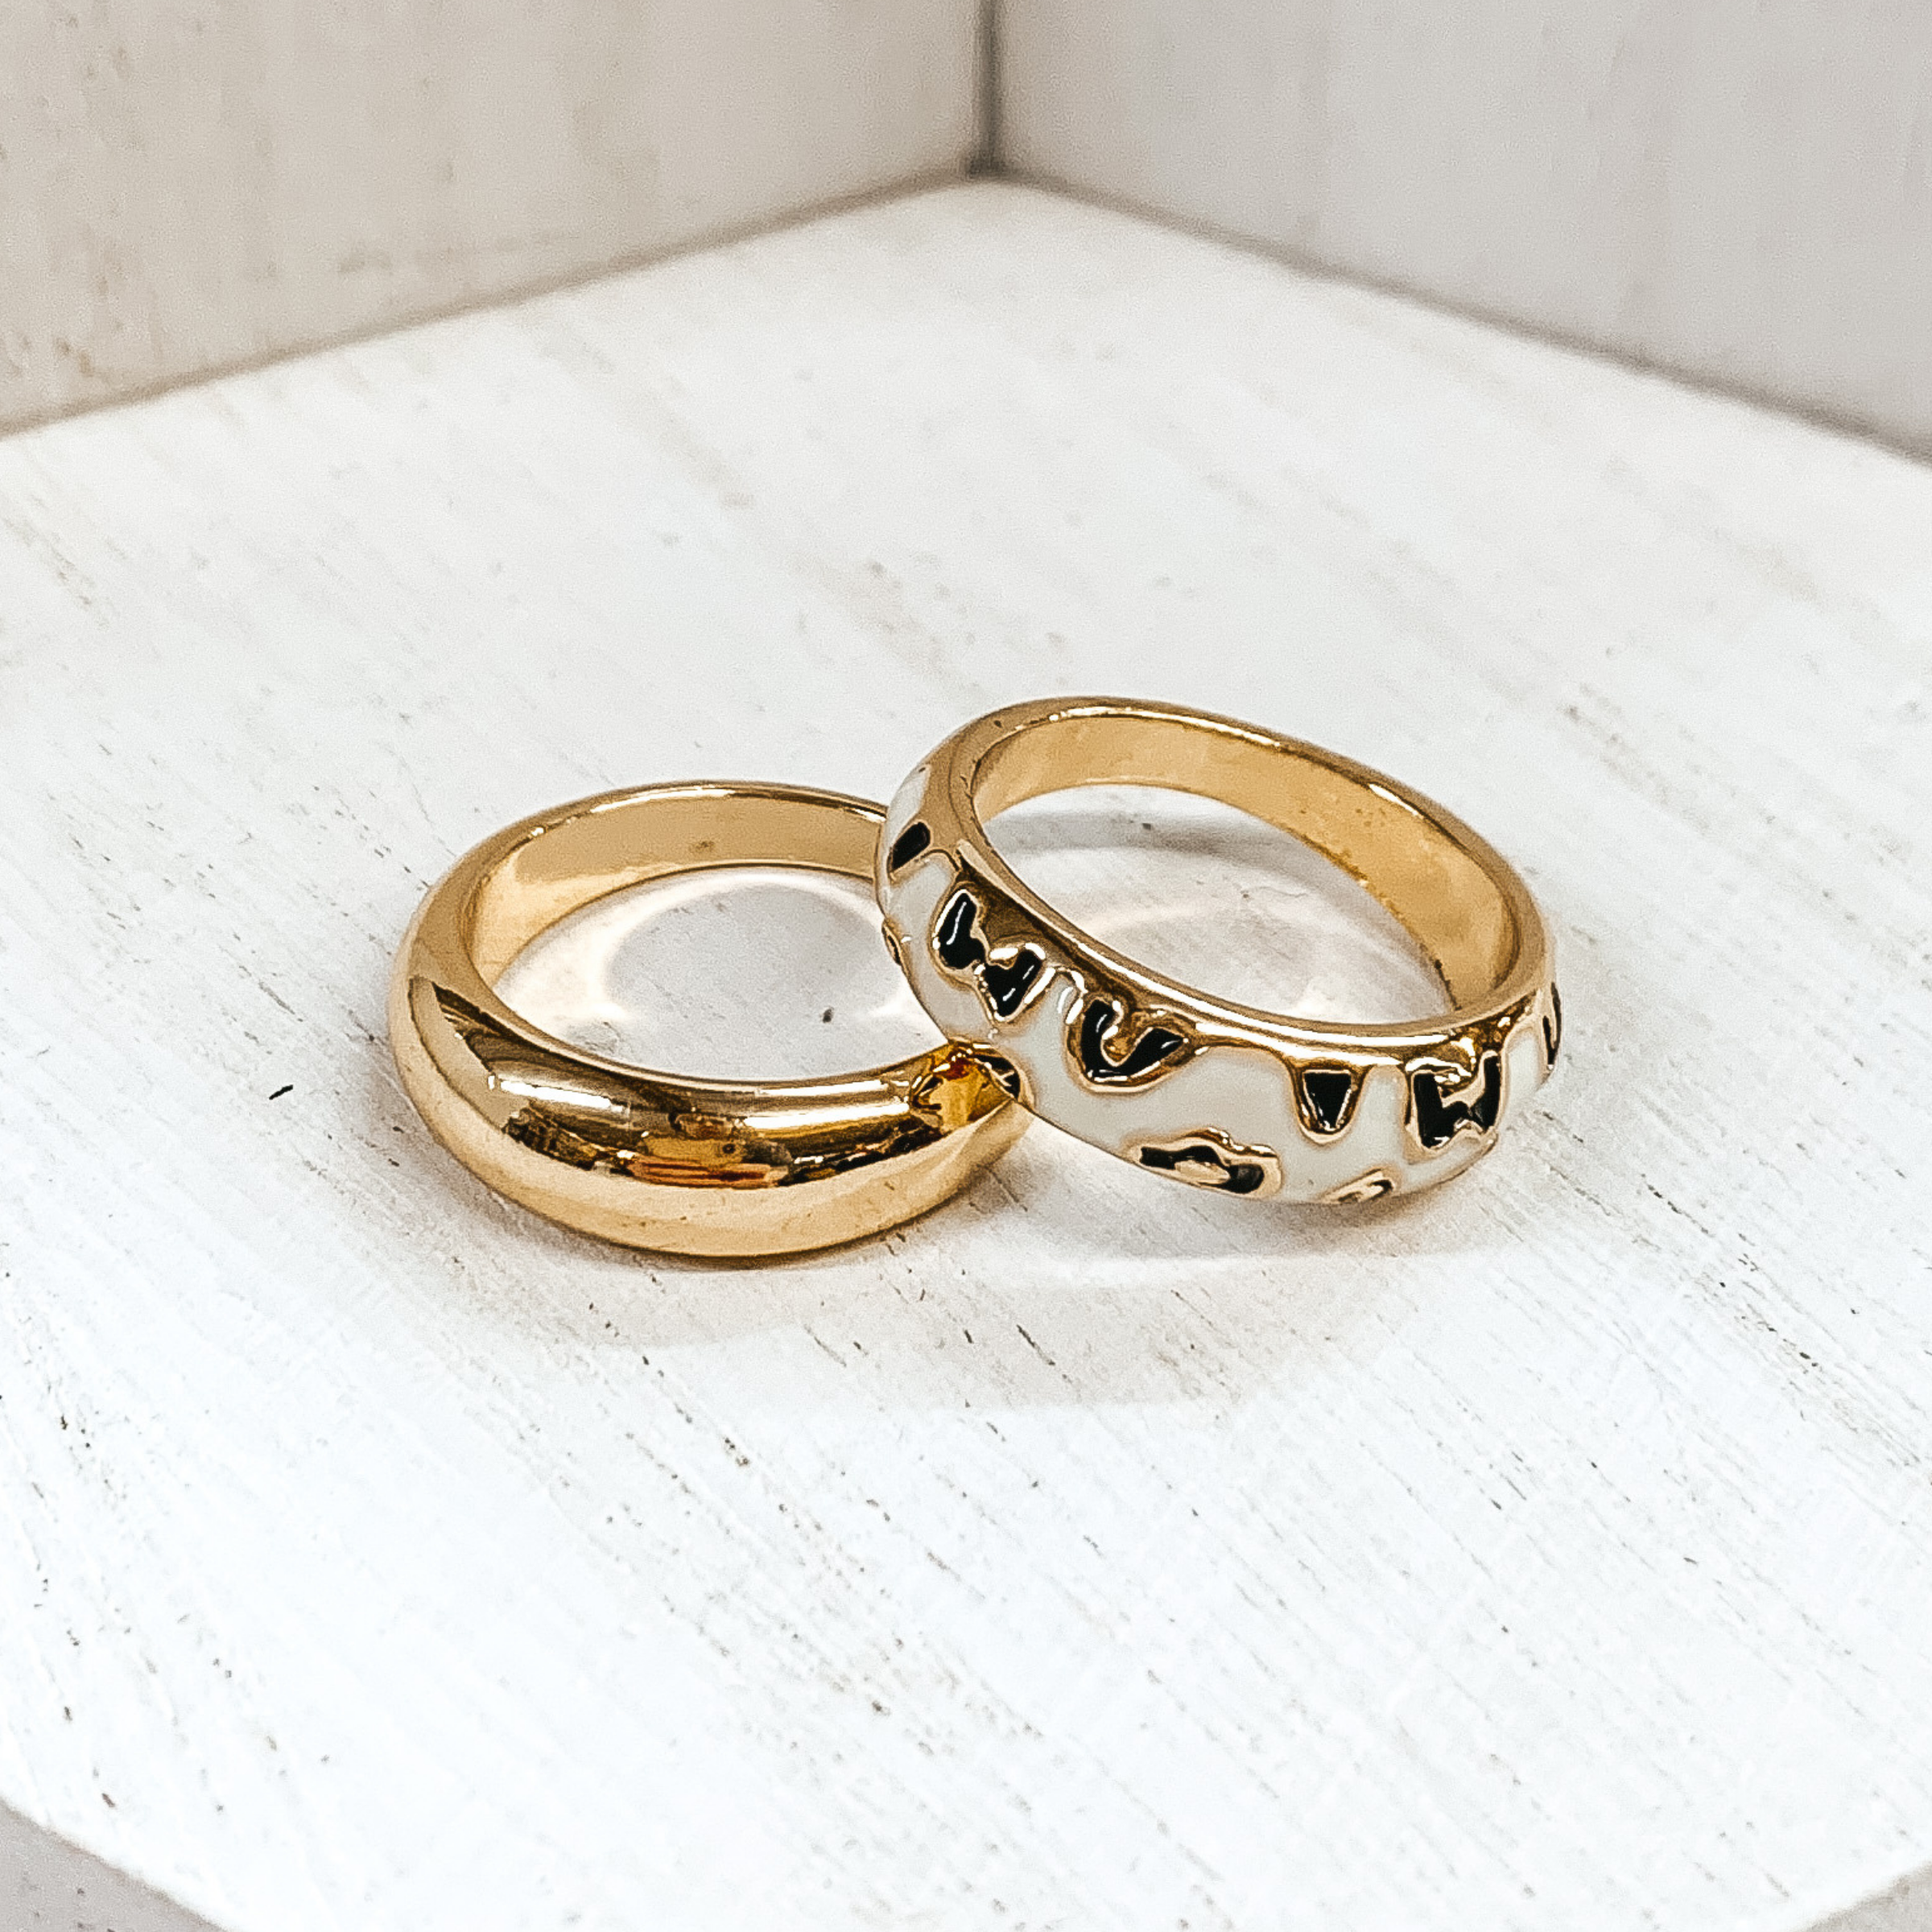 Set of two thick, gold rings. One ring is plain, while the secong ring has a white colored part with black leopard print. These rings are pictured on a white background. 